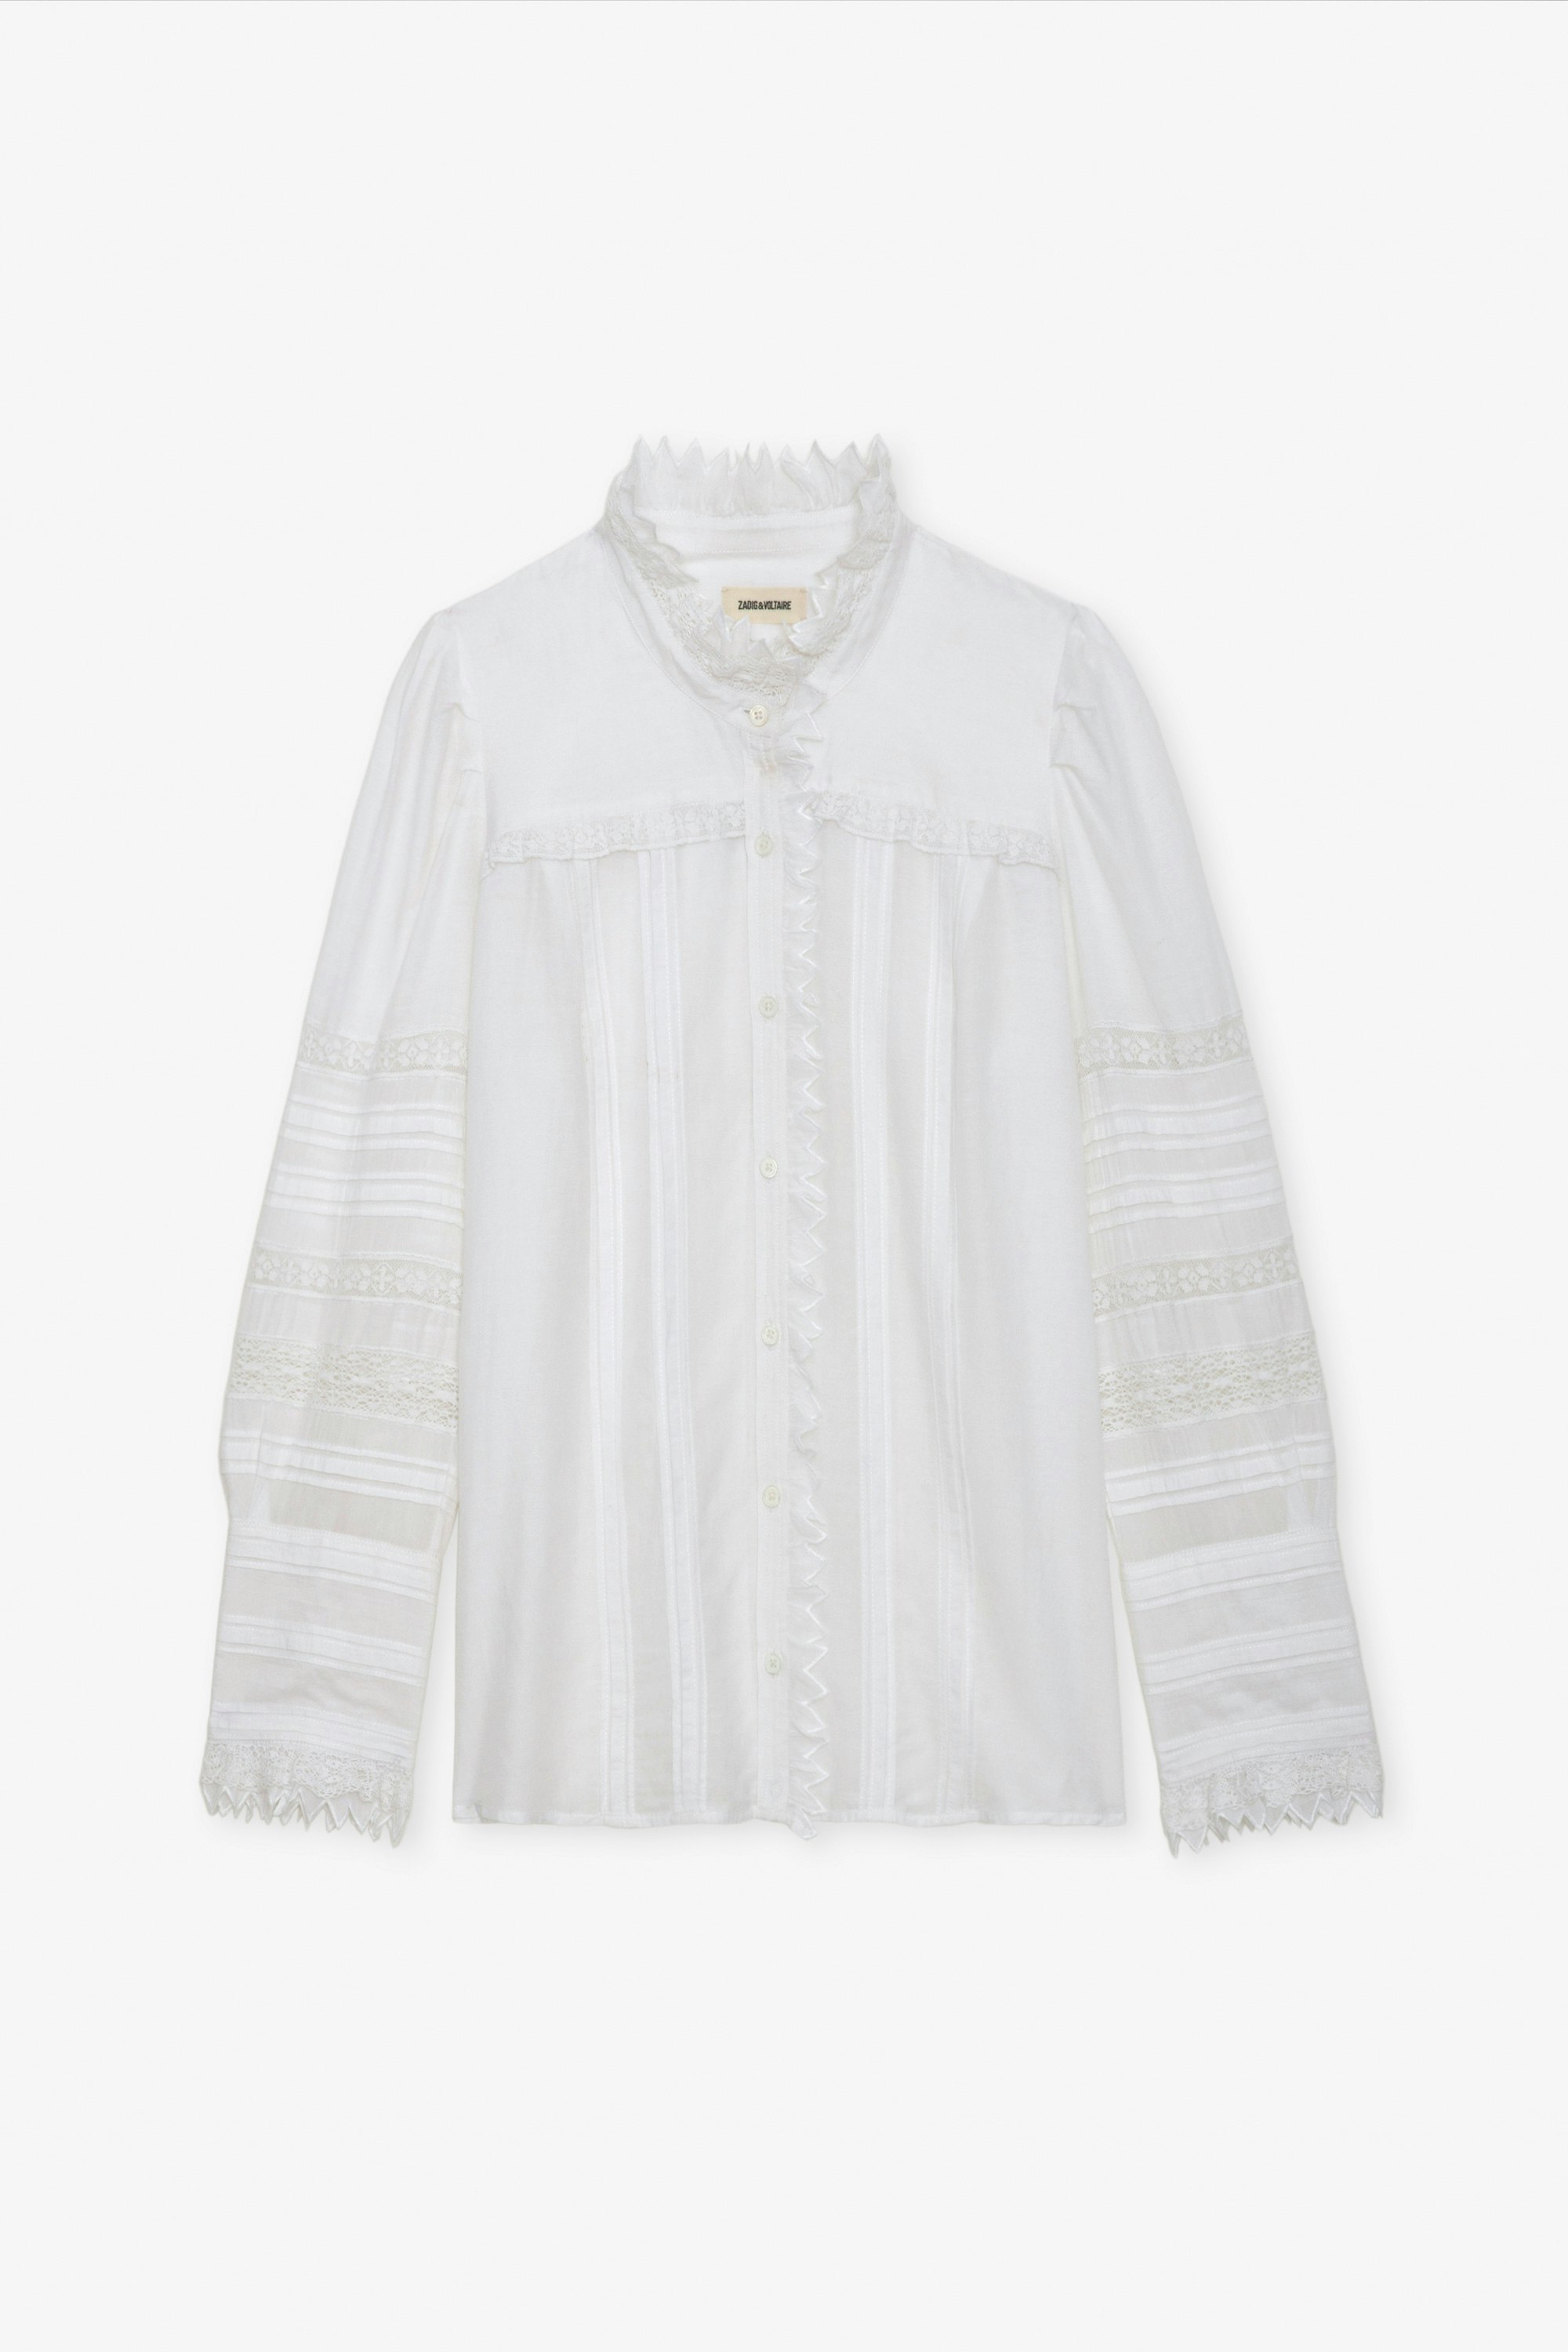 Trevy Blouse - White cotton blouse with long puff sleeves, lace bands and gathers.